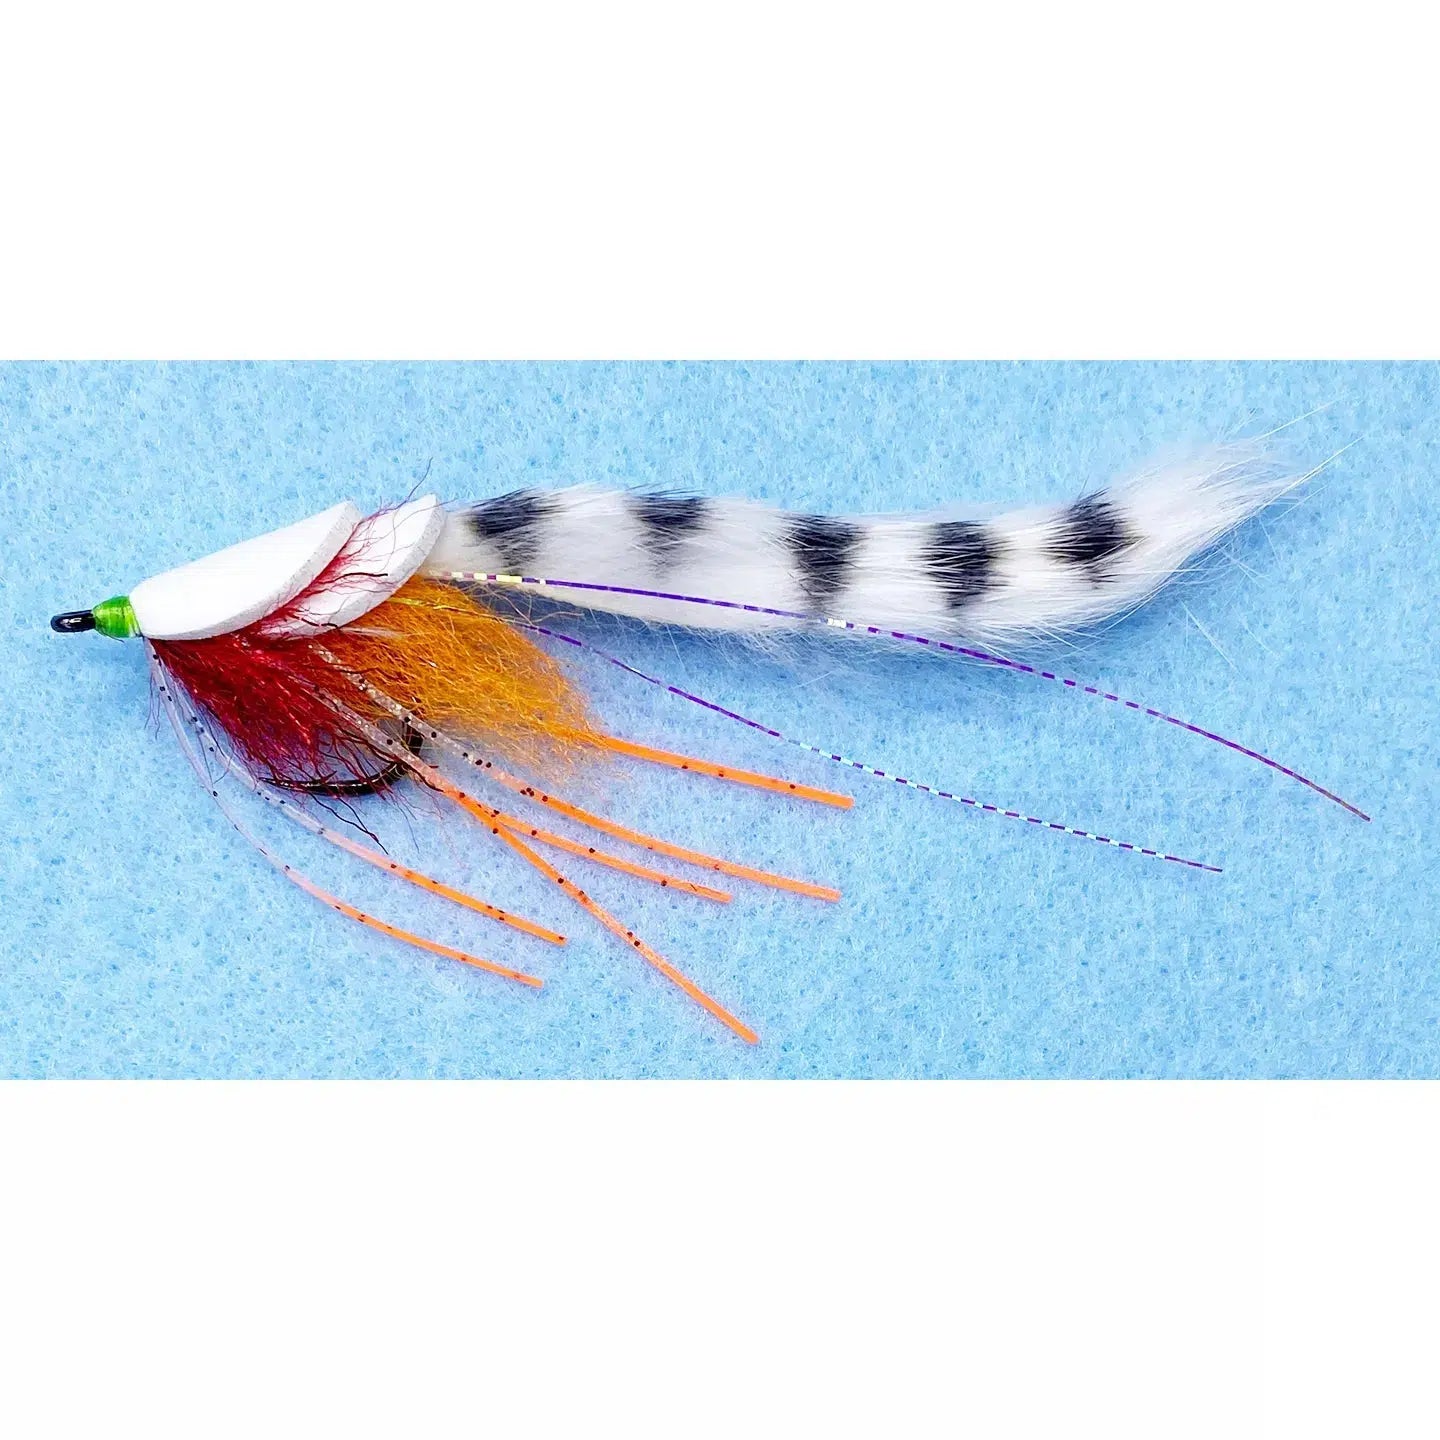 Enrico Puglisi Diver Fly-Lure - Fly-Enrico Puglisi-White Devil-Size 2/0-Fishing Station